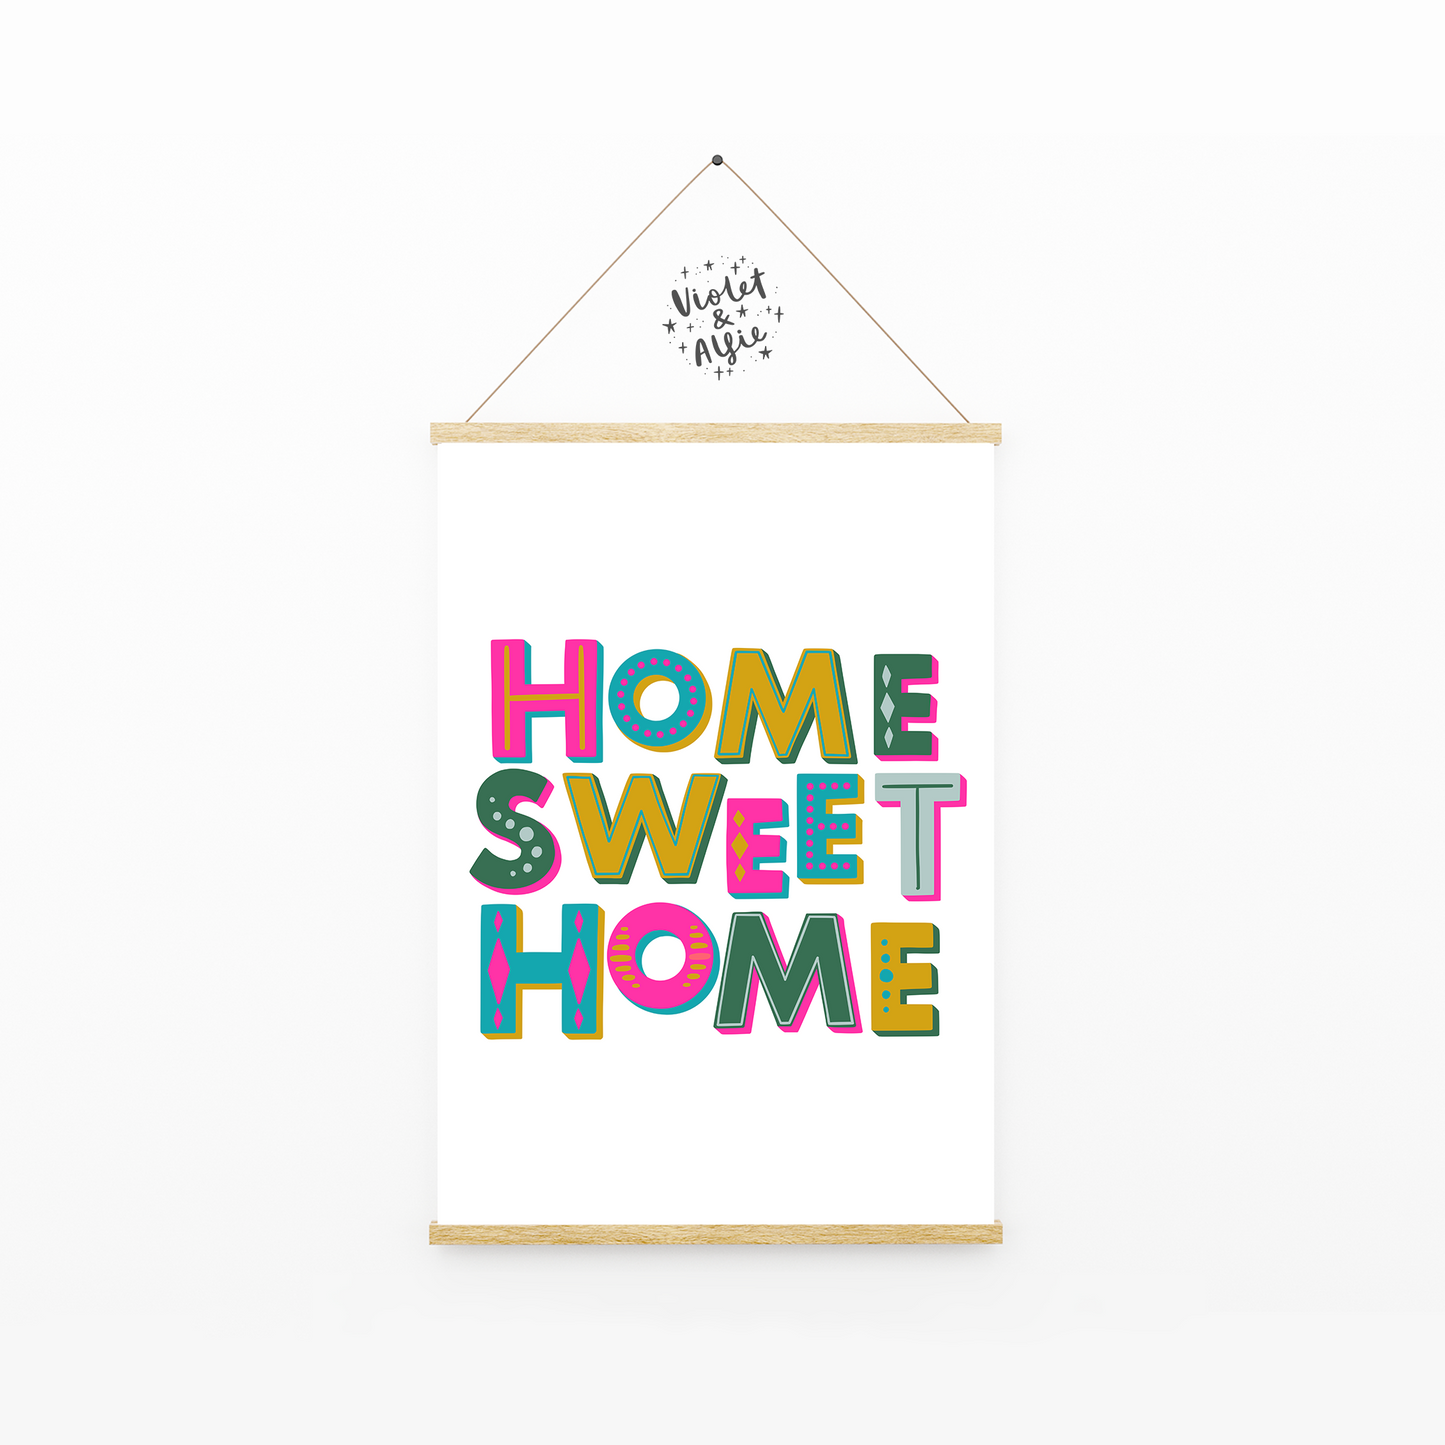 home sweet home print, home print, quirky  decor, colourful wall art, hand lettered prints, prints for your home, kitchen decor, happy wall art